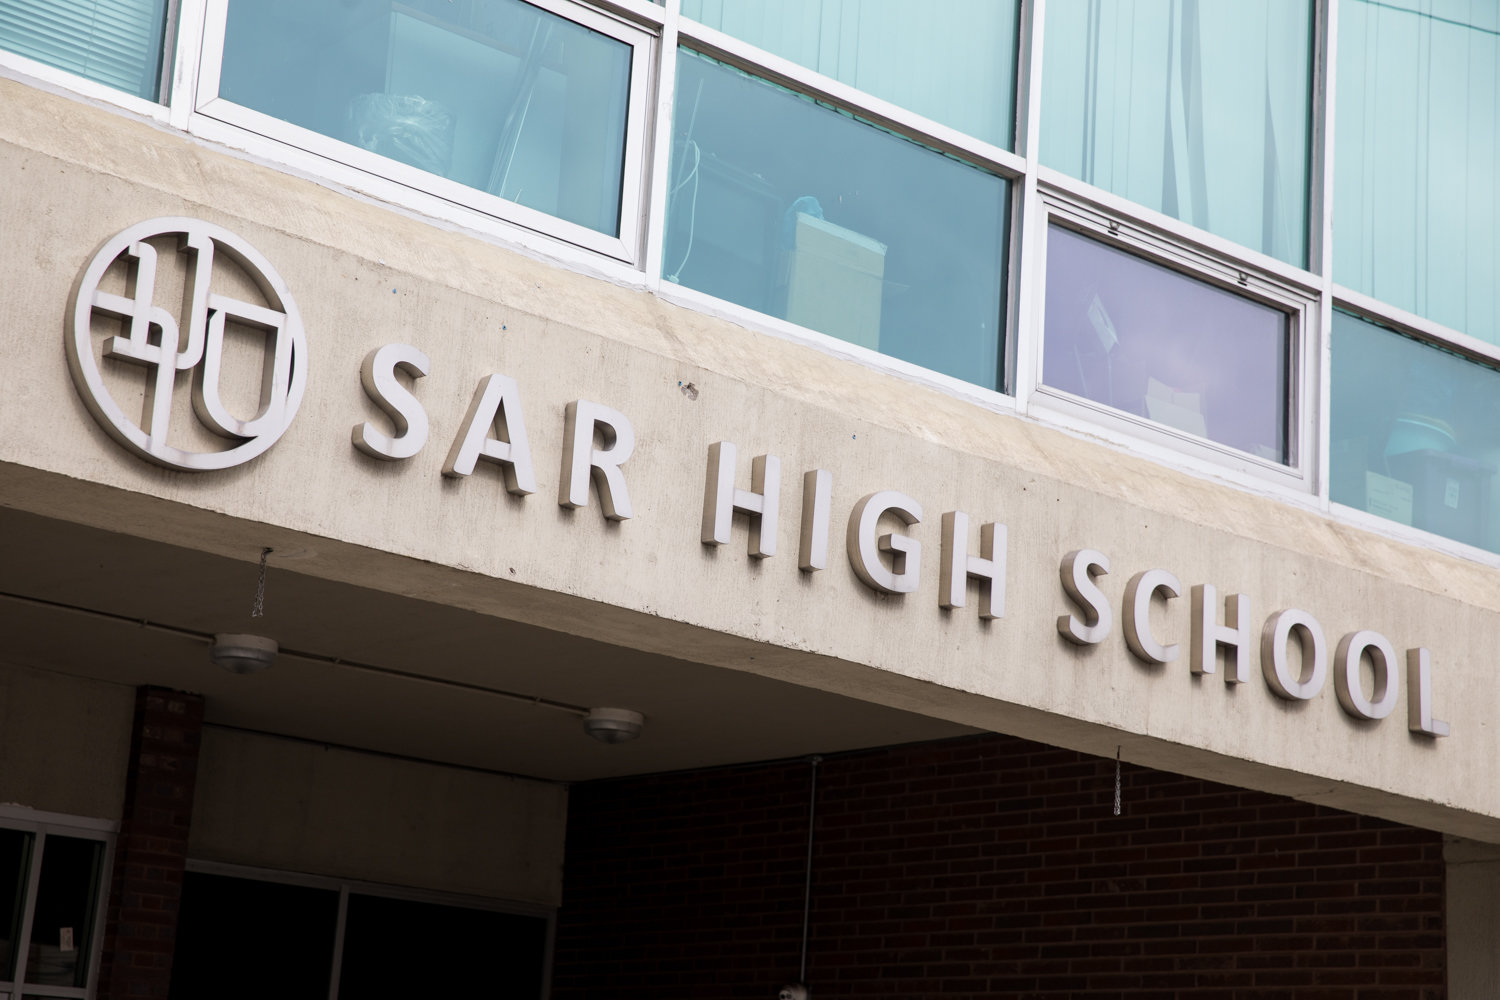 It’s unclear when SAR High School will reopen after it closed March 3 over a suspected case of the coronavirus.